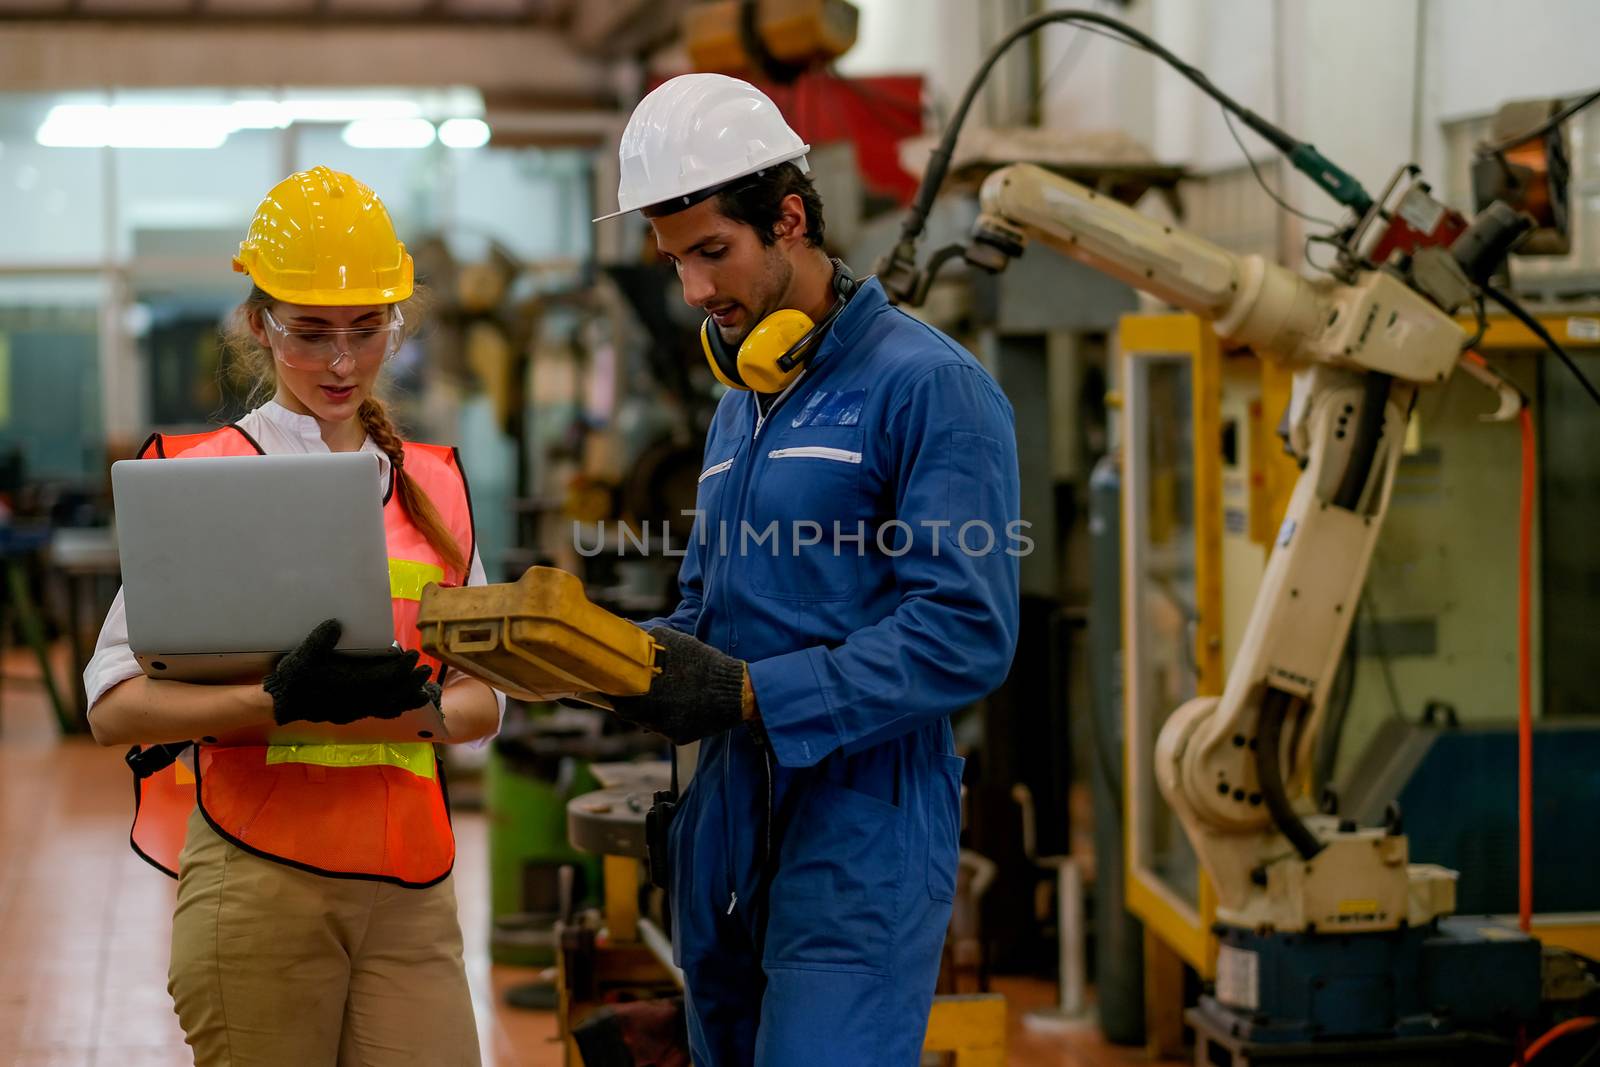 Technician or worker man and woman discussion about robot working in factory by nrradmin